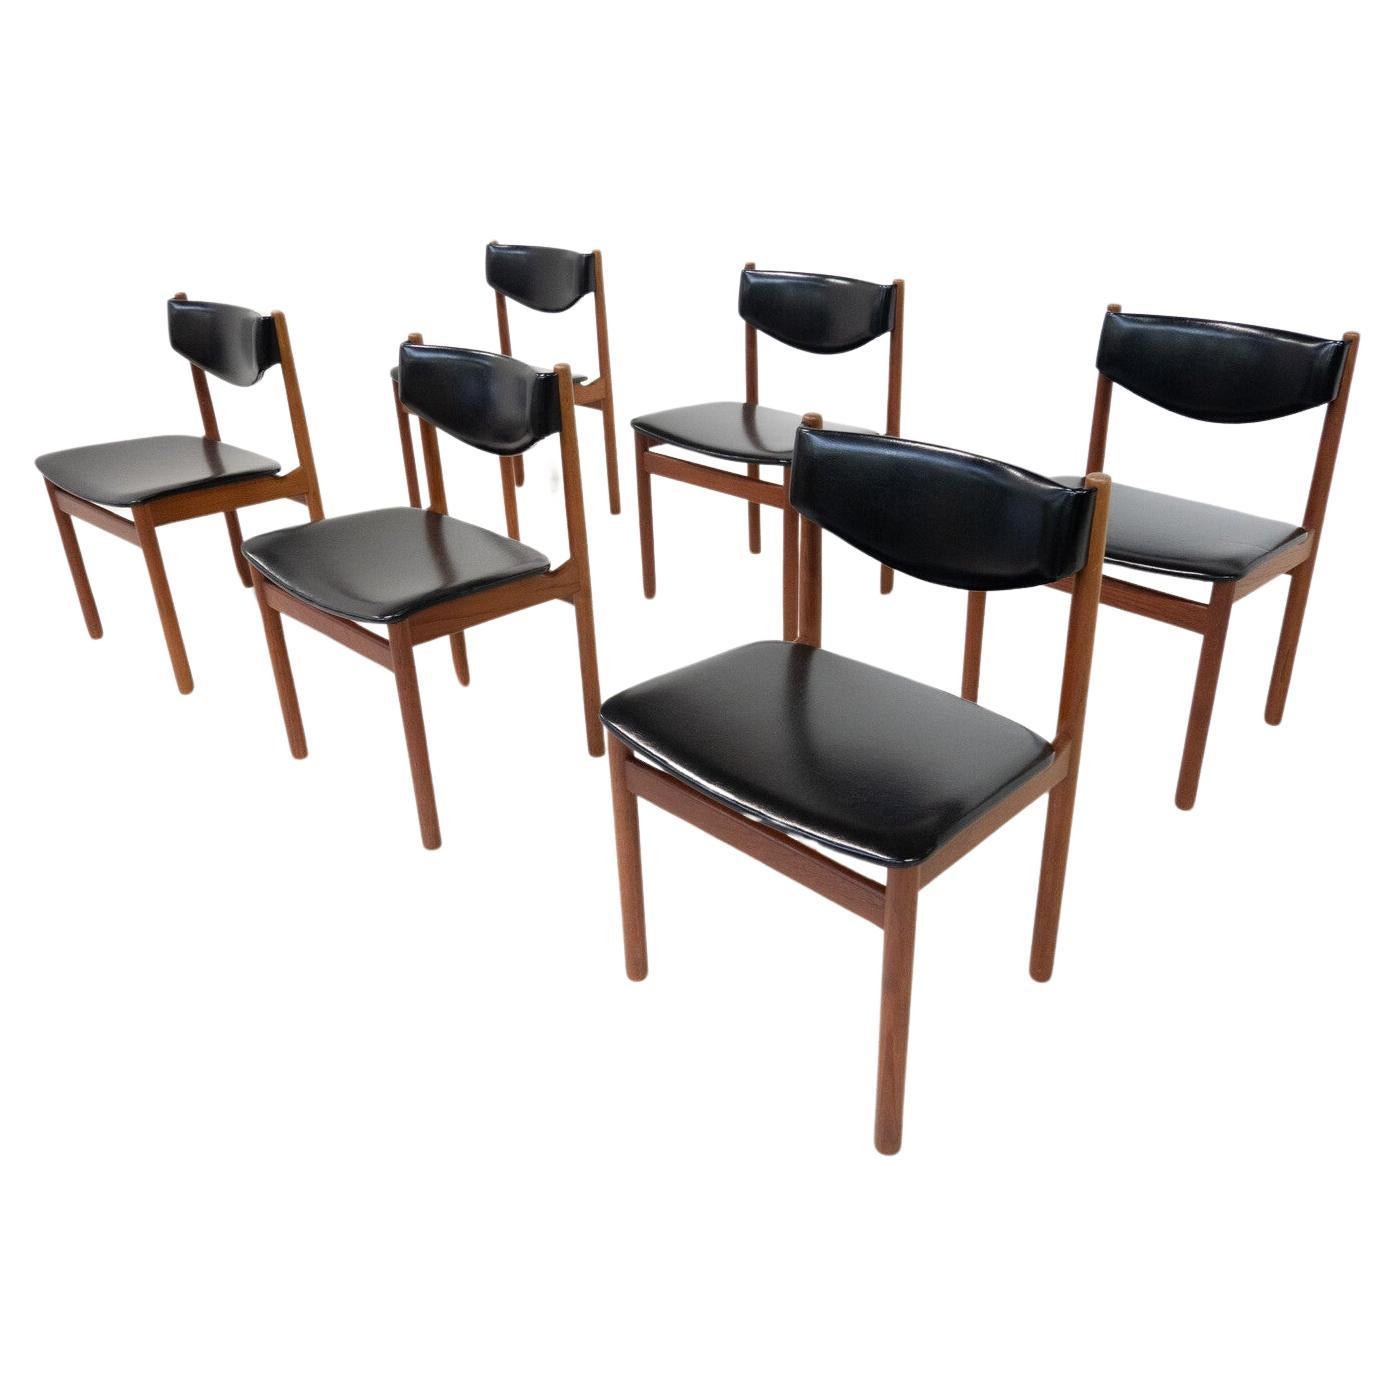 Mid-Century Modern Set of 6 Scandinavian Chairs, 1960s For Sale